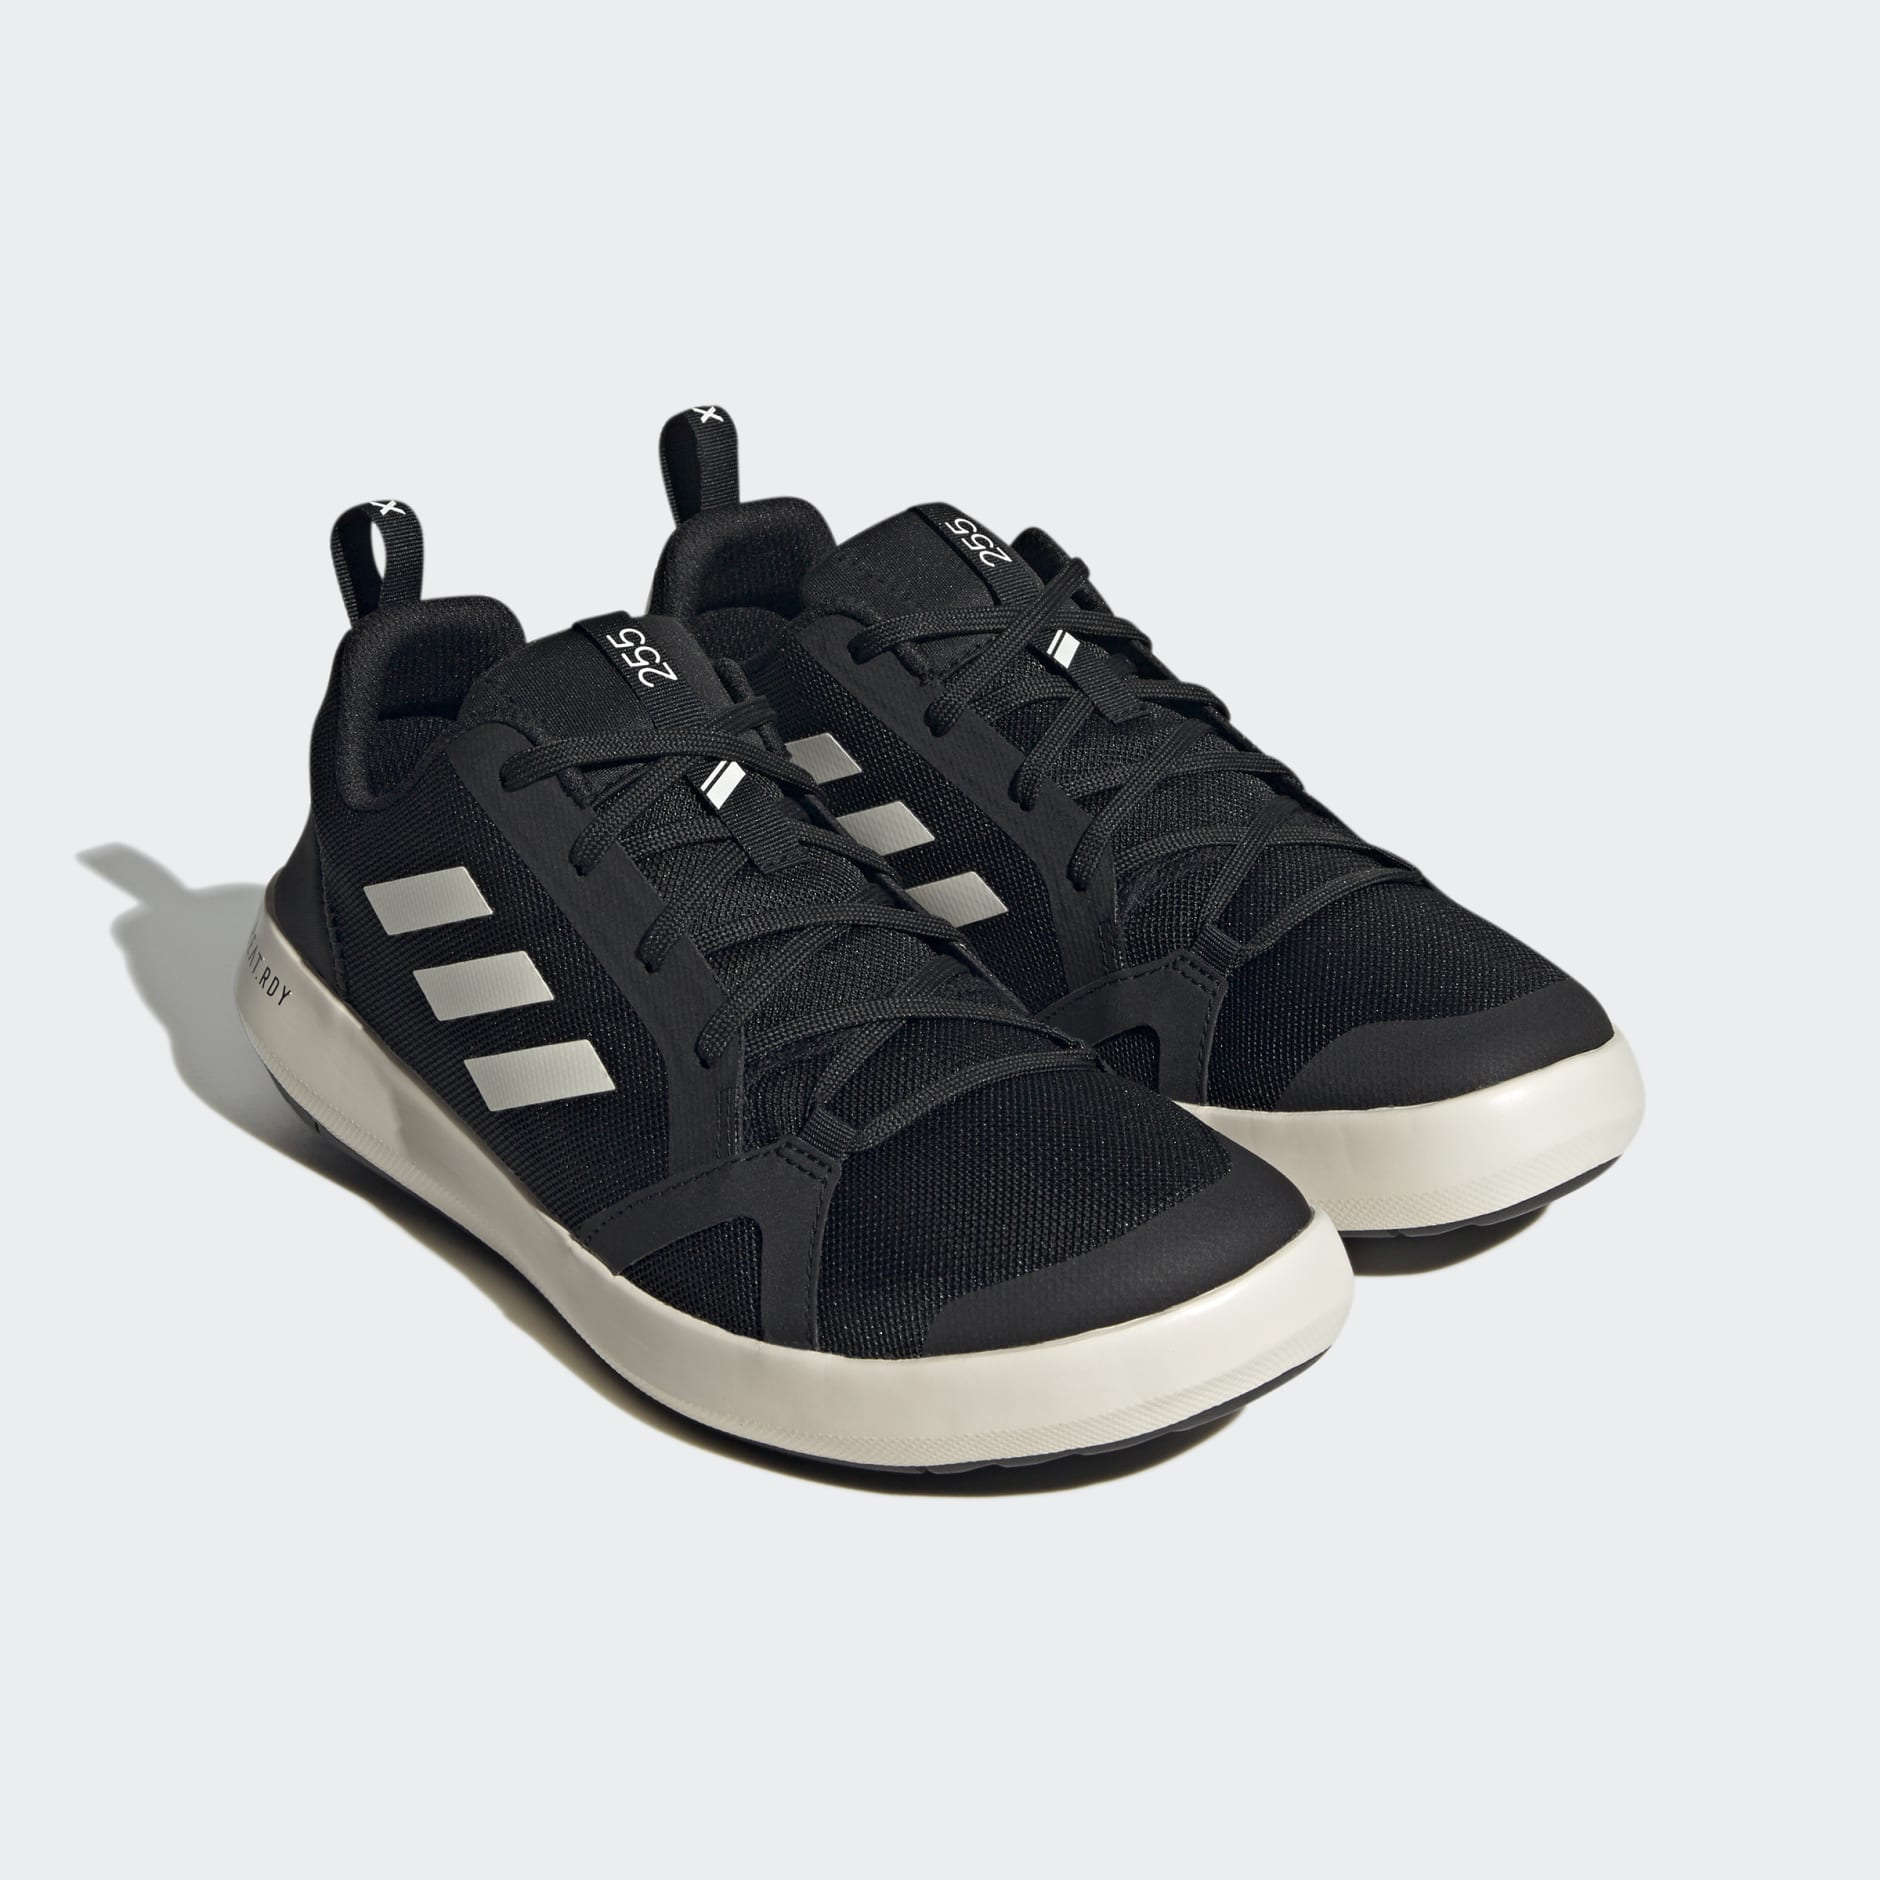 Boat HEAT.RDY Water Shoes - adidas OM